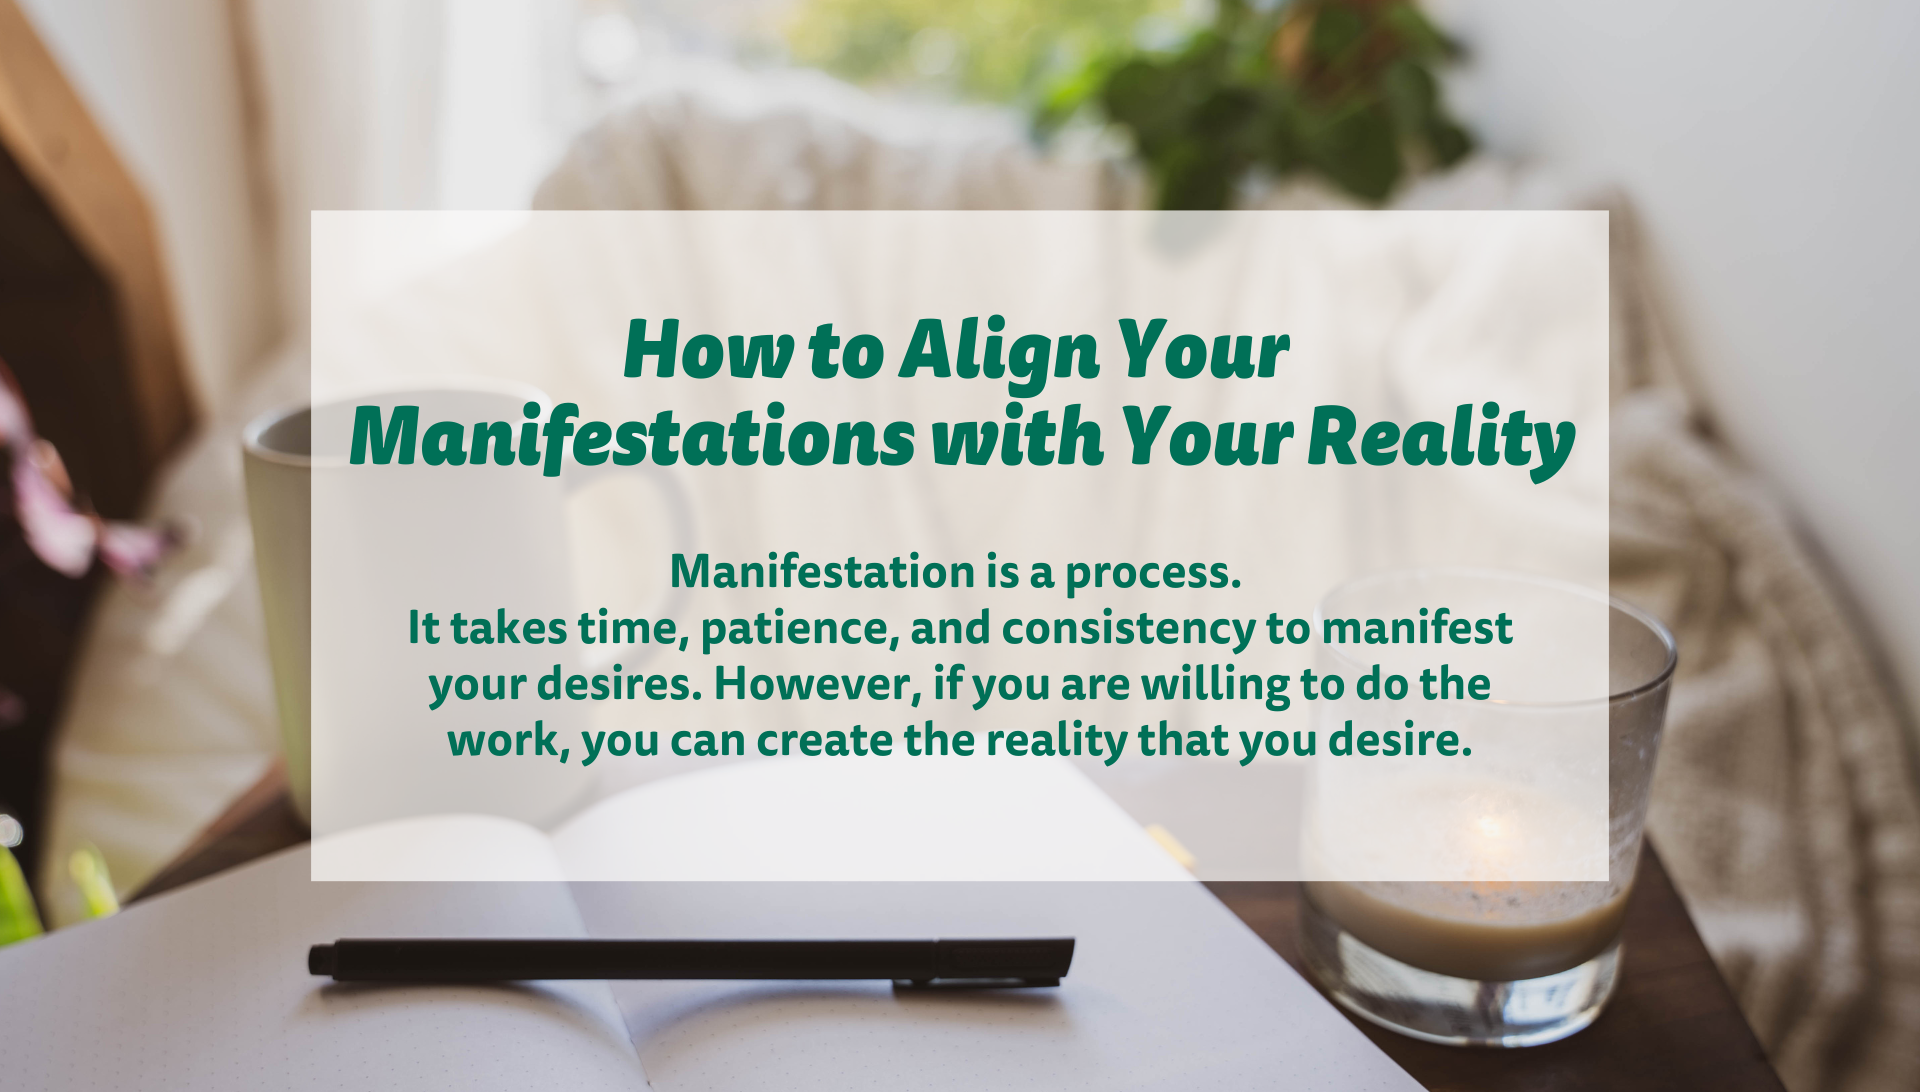 Aligning your manifestations with your reality is essential for manifesting your desires